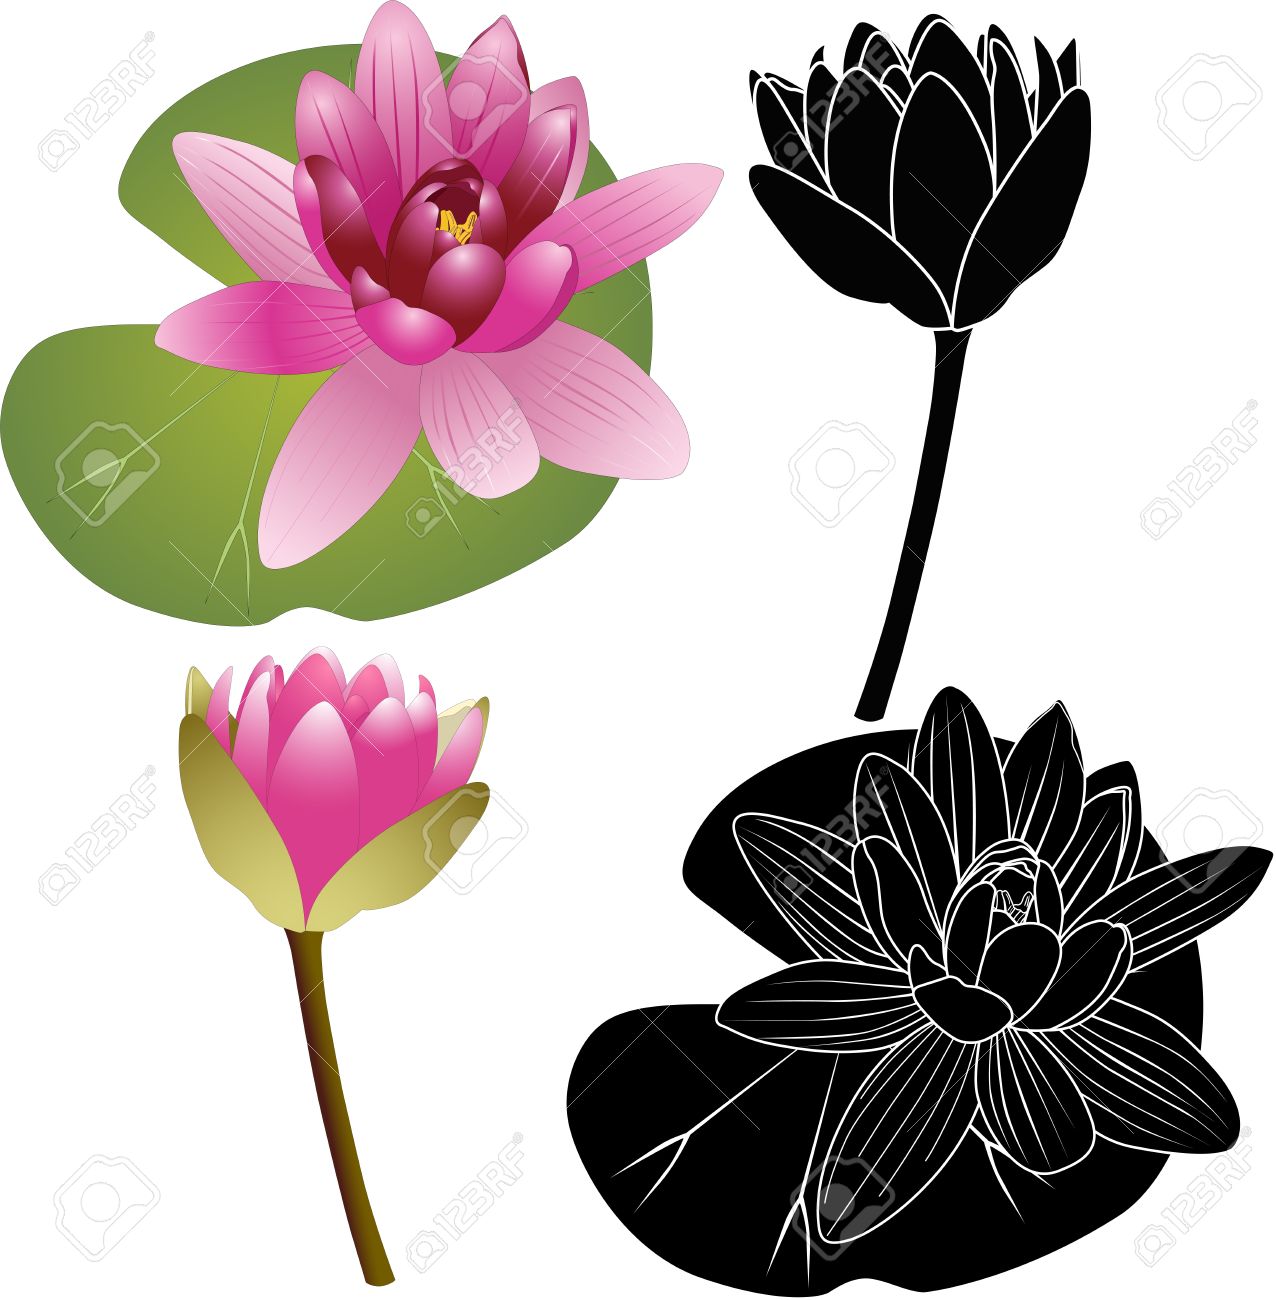 Lily Of The Lotus Of The Water Lily Royalty Free Cliparts, Vectors.